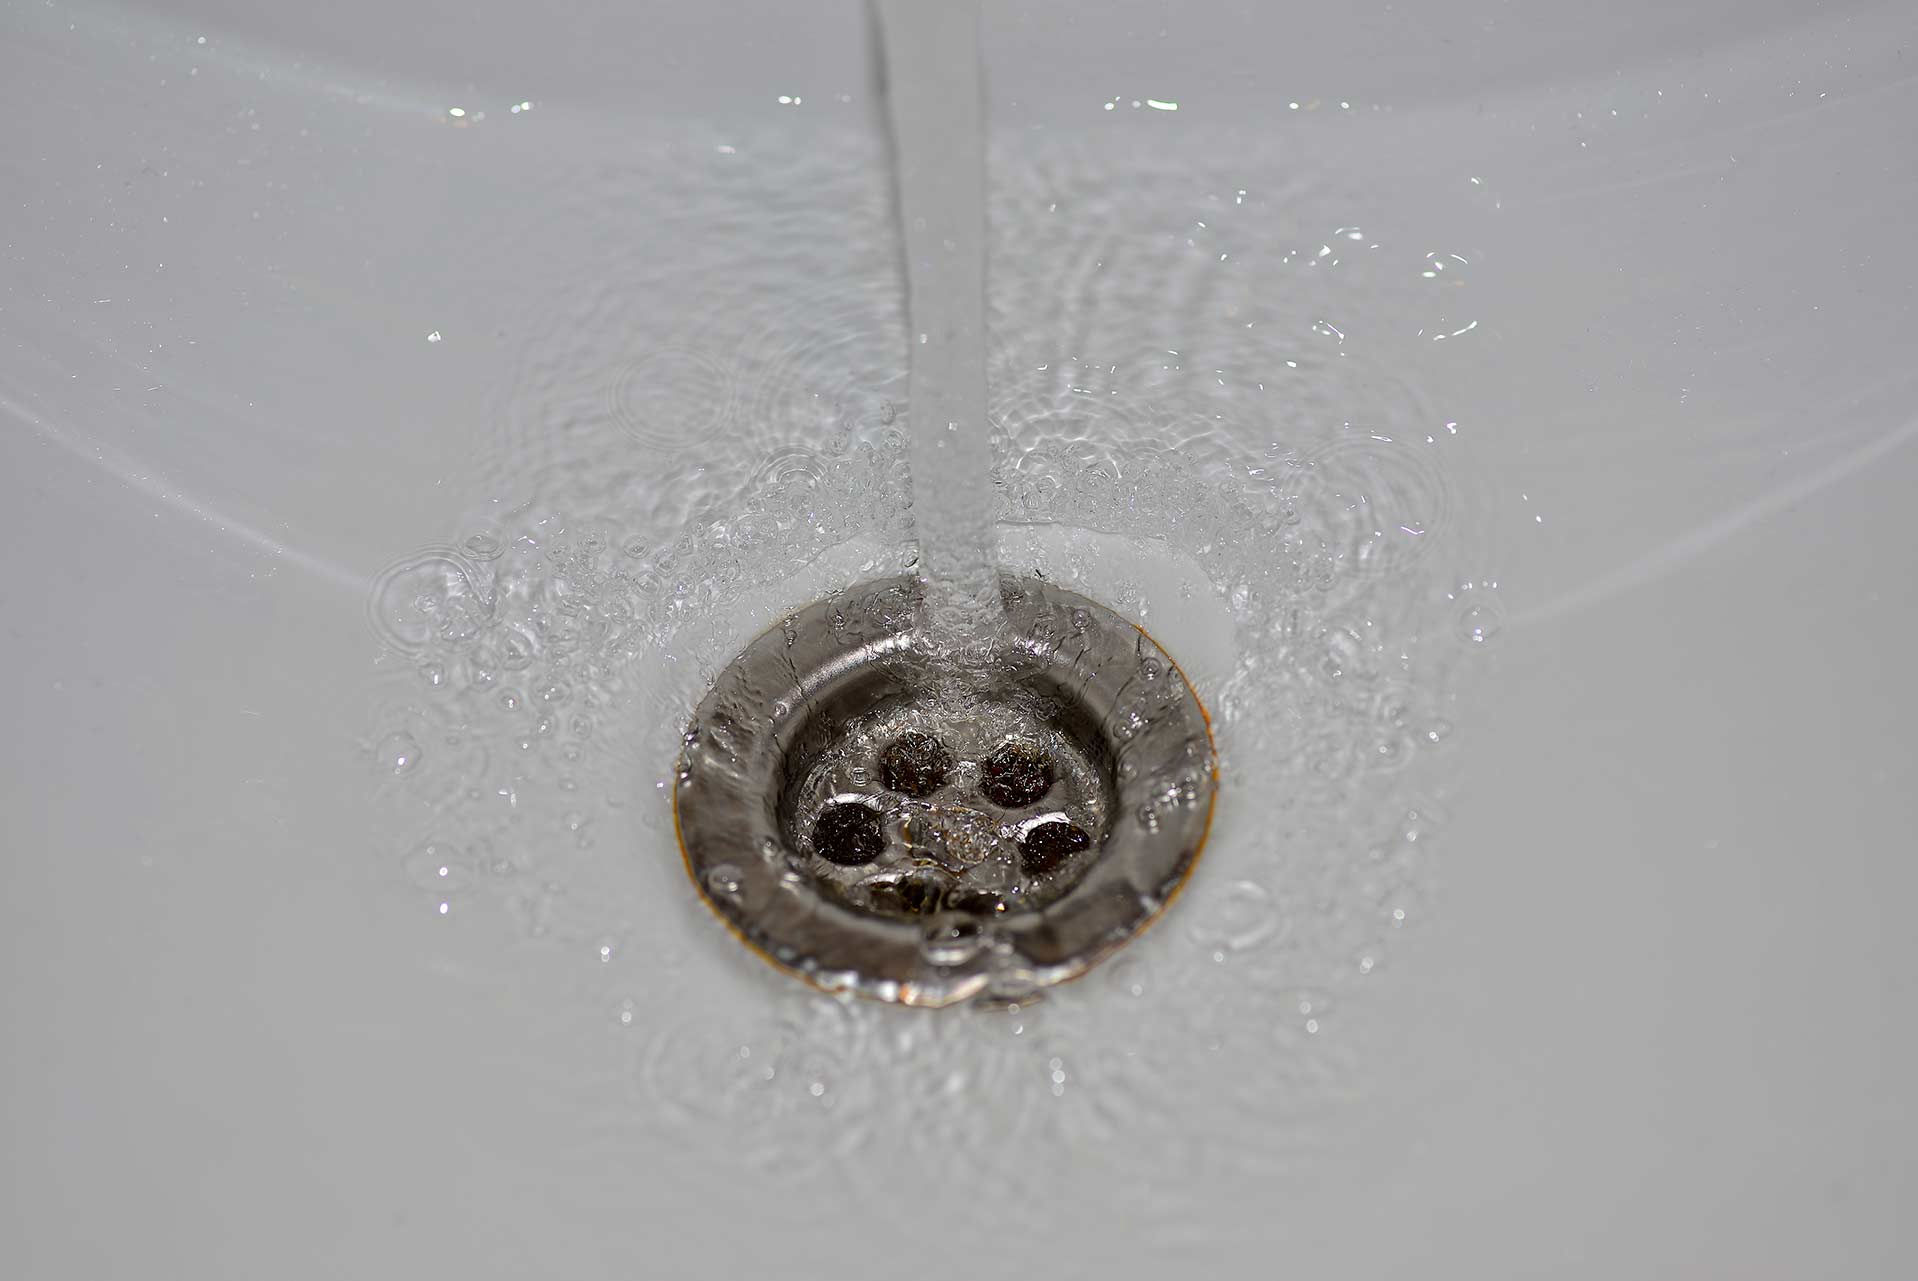 A2B Drains provides services to unblock blocked sinks and drains for properties in Belgravia.